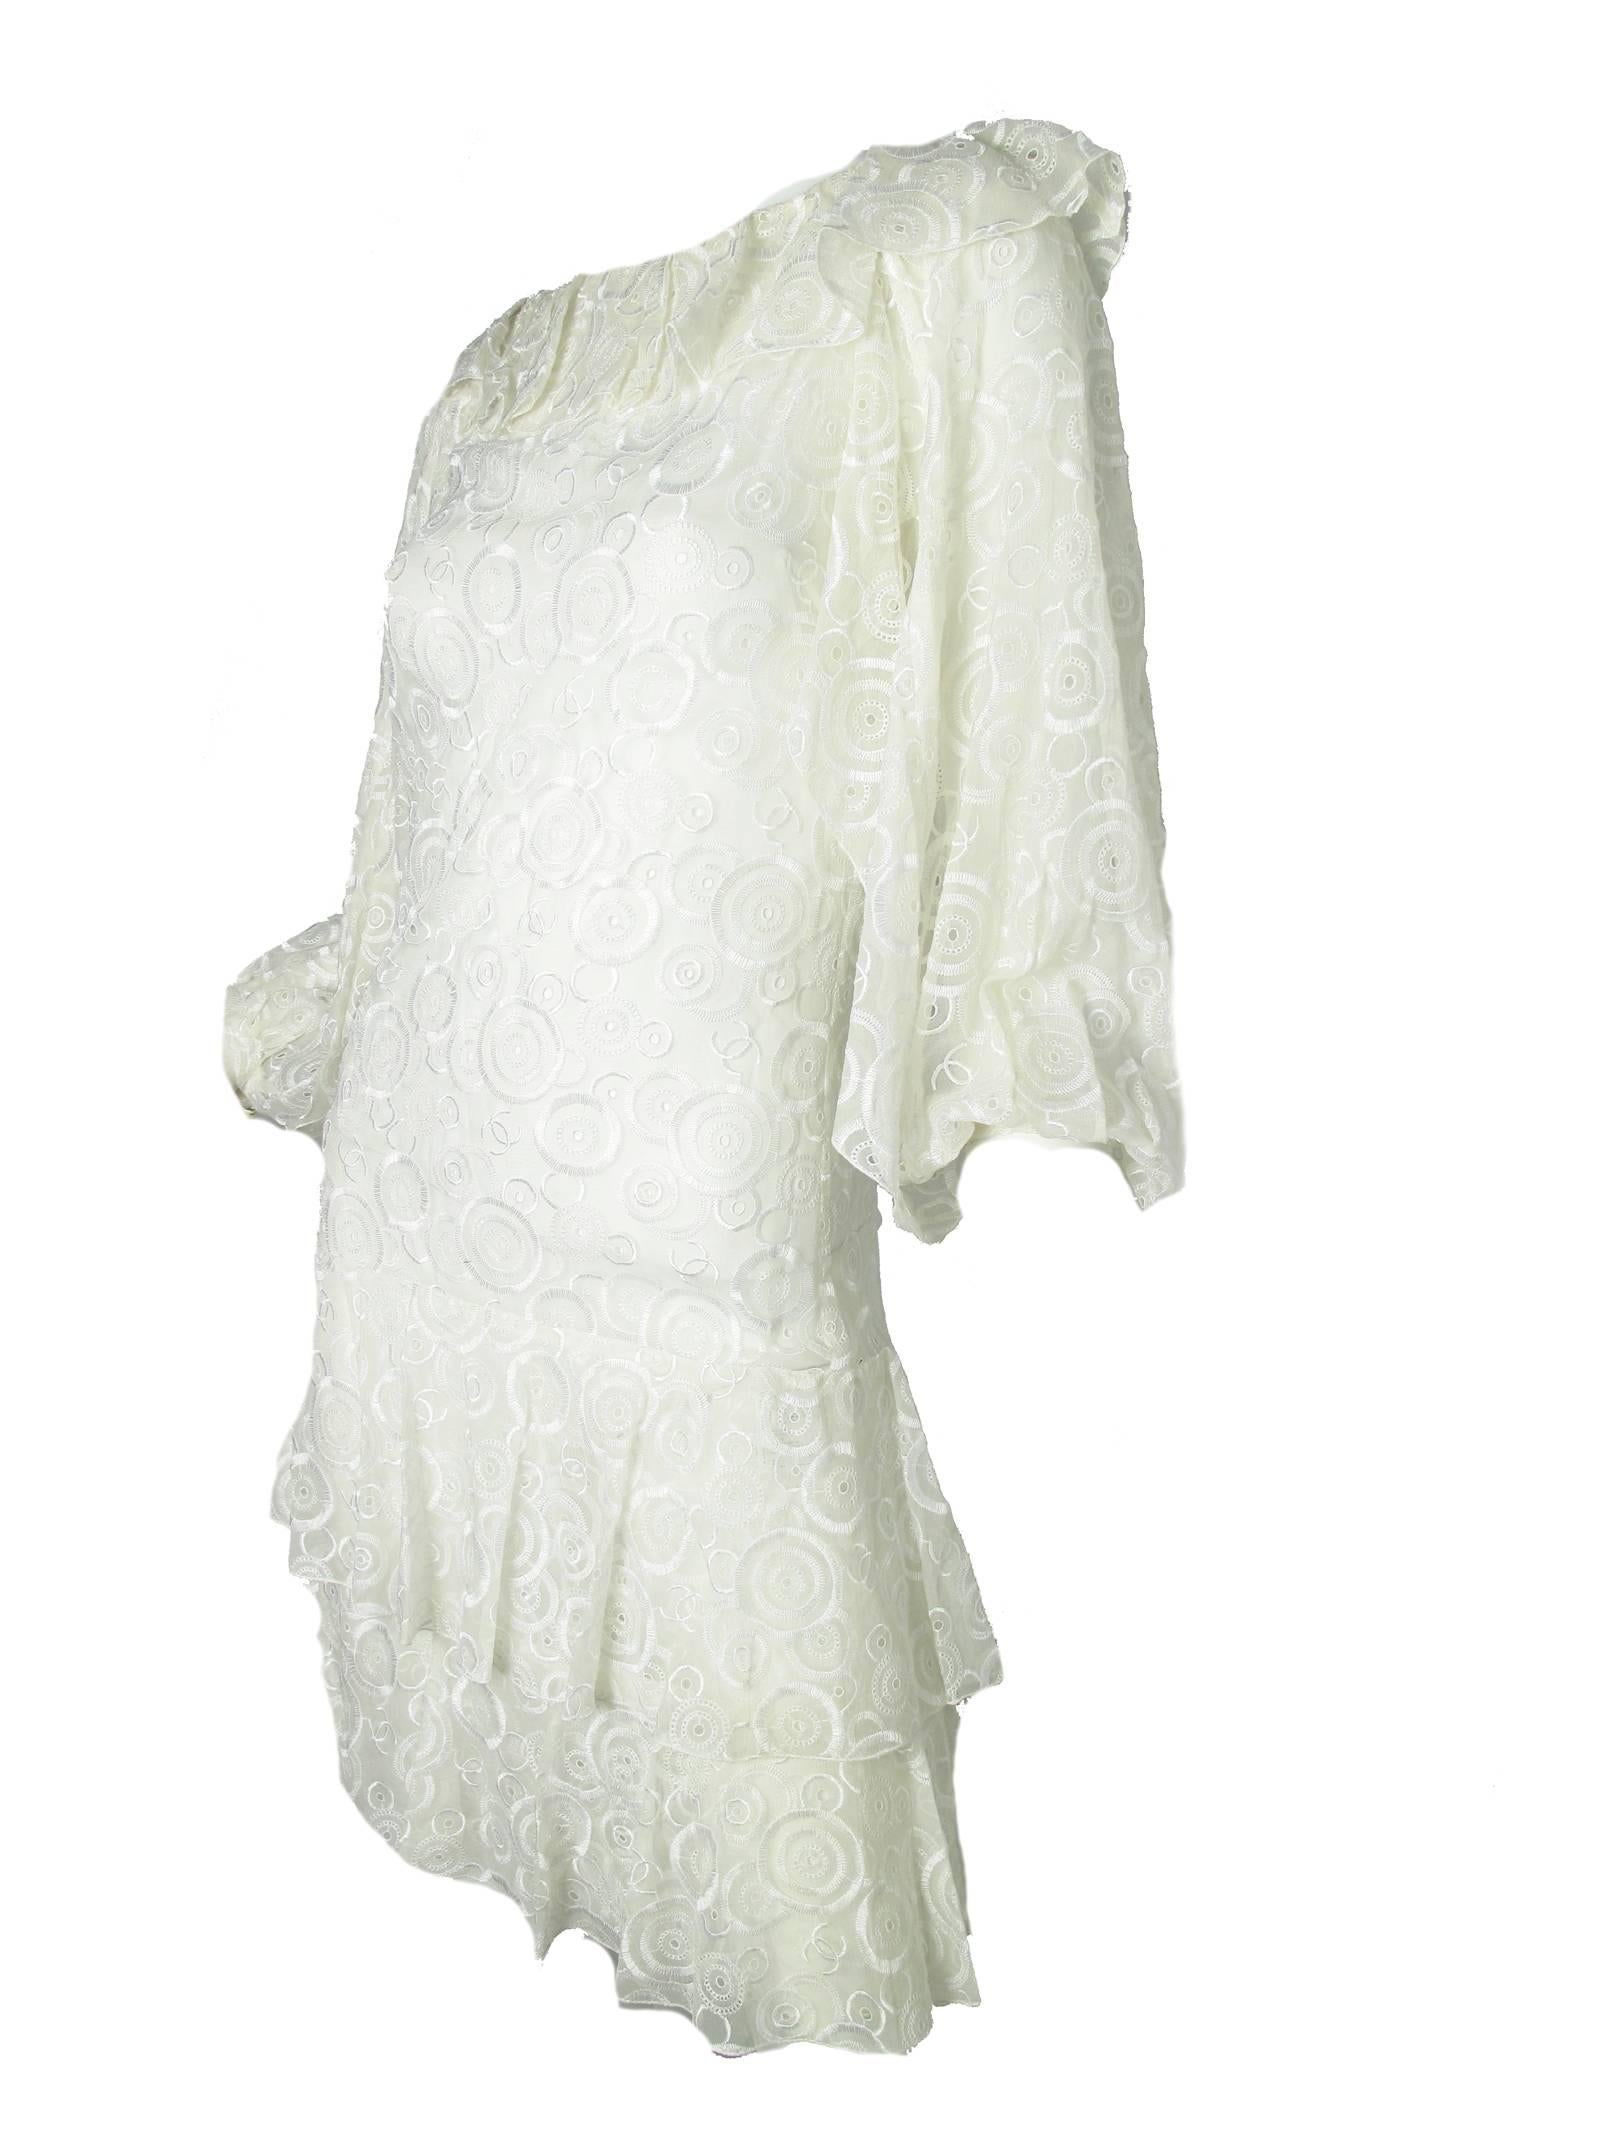 2001 Chanel white lace sheer ruffle dress with 